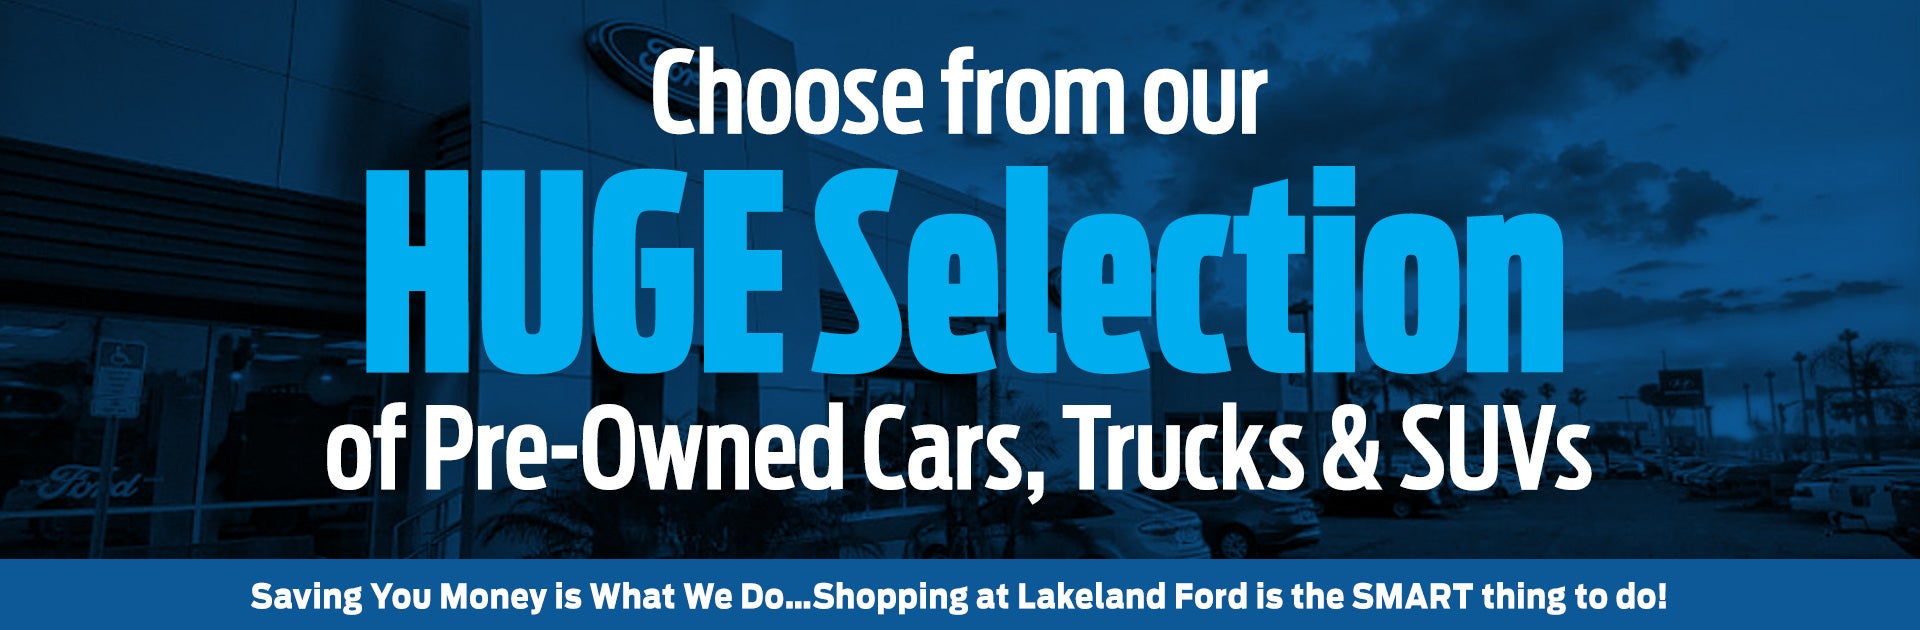 Search Pre-Owned Cars, Trucks & SUV's